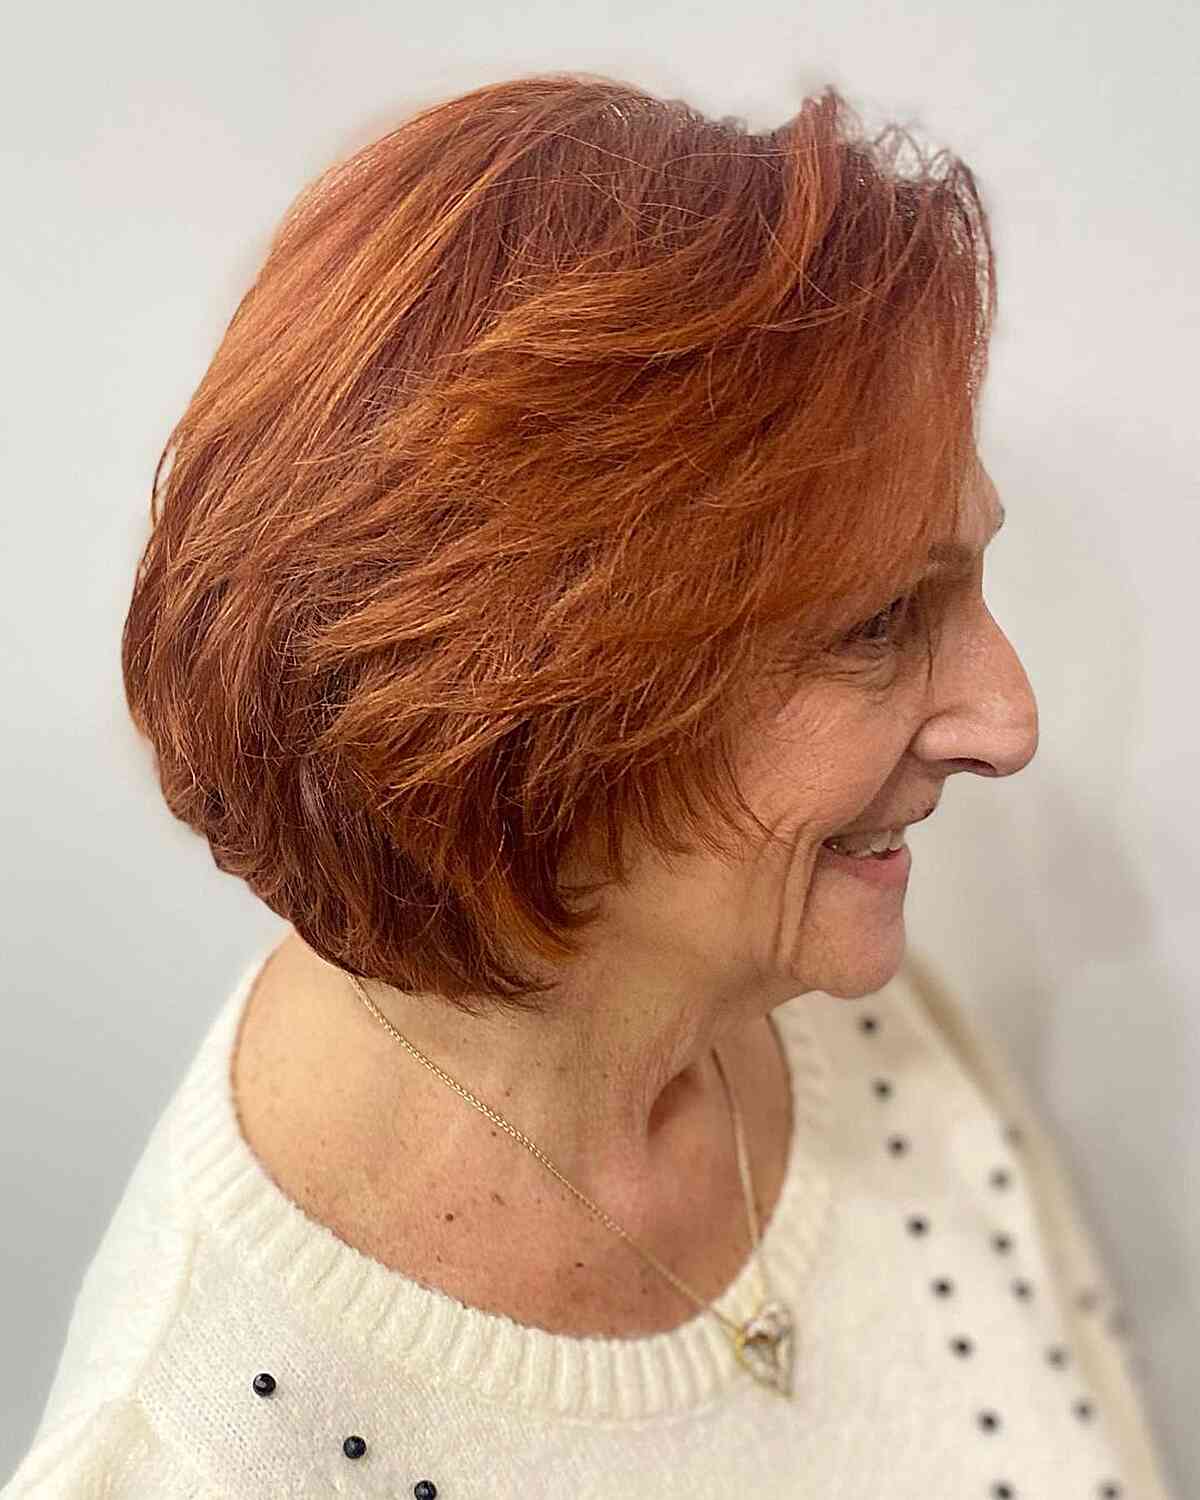 Neck-Length Textured Copper Bob for Fall and Seniors Over 60